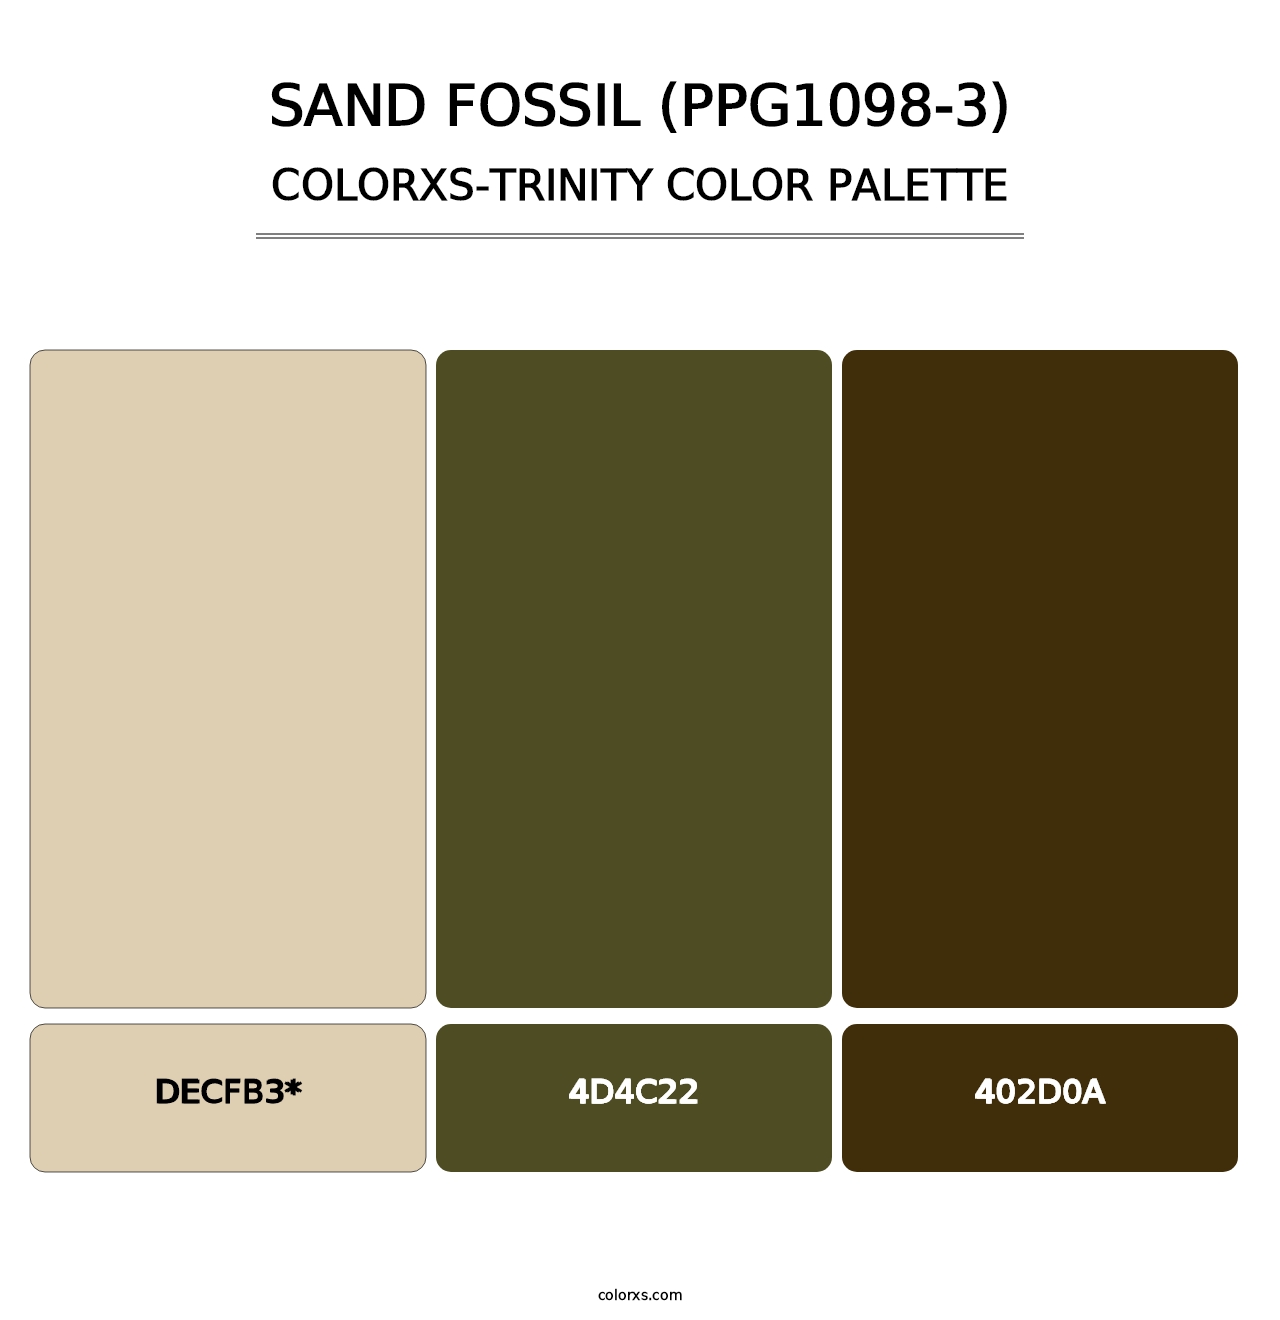 Sand Fossil (PPG1098-3) - Colorxs Trinity Palette